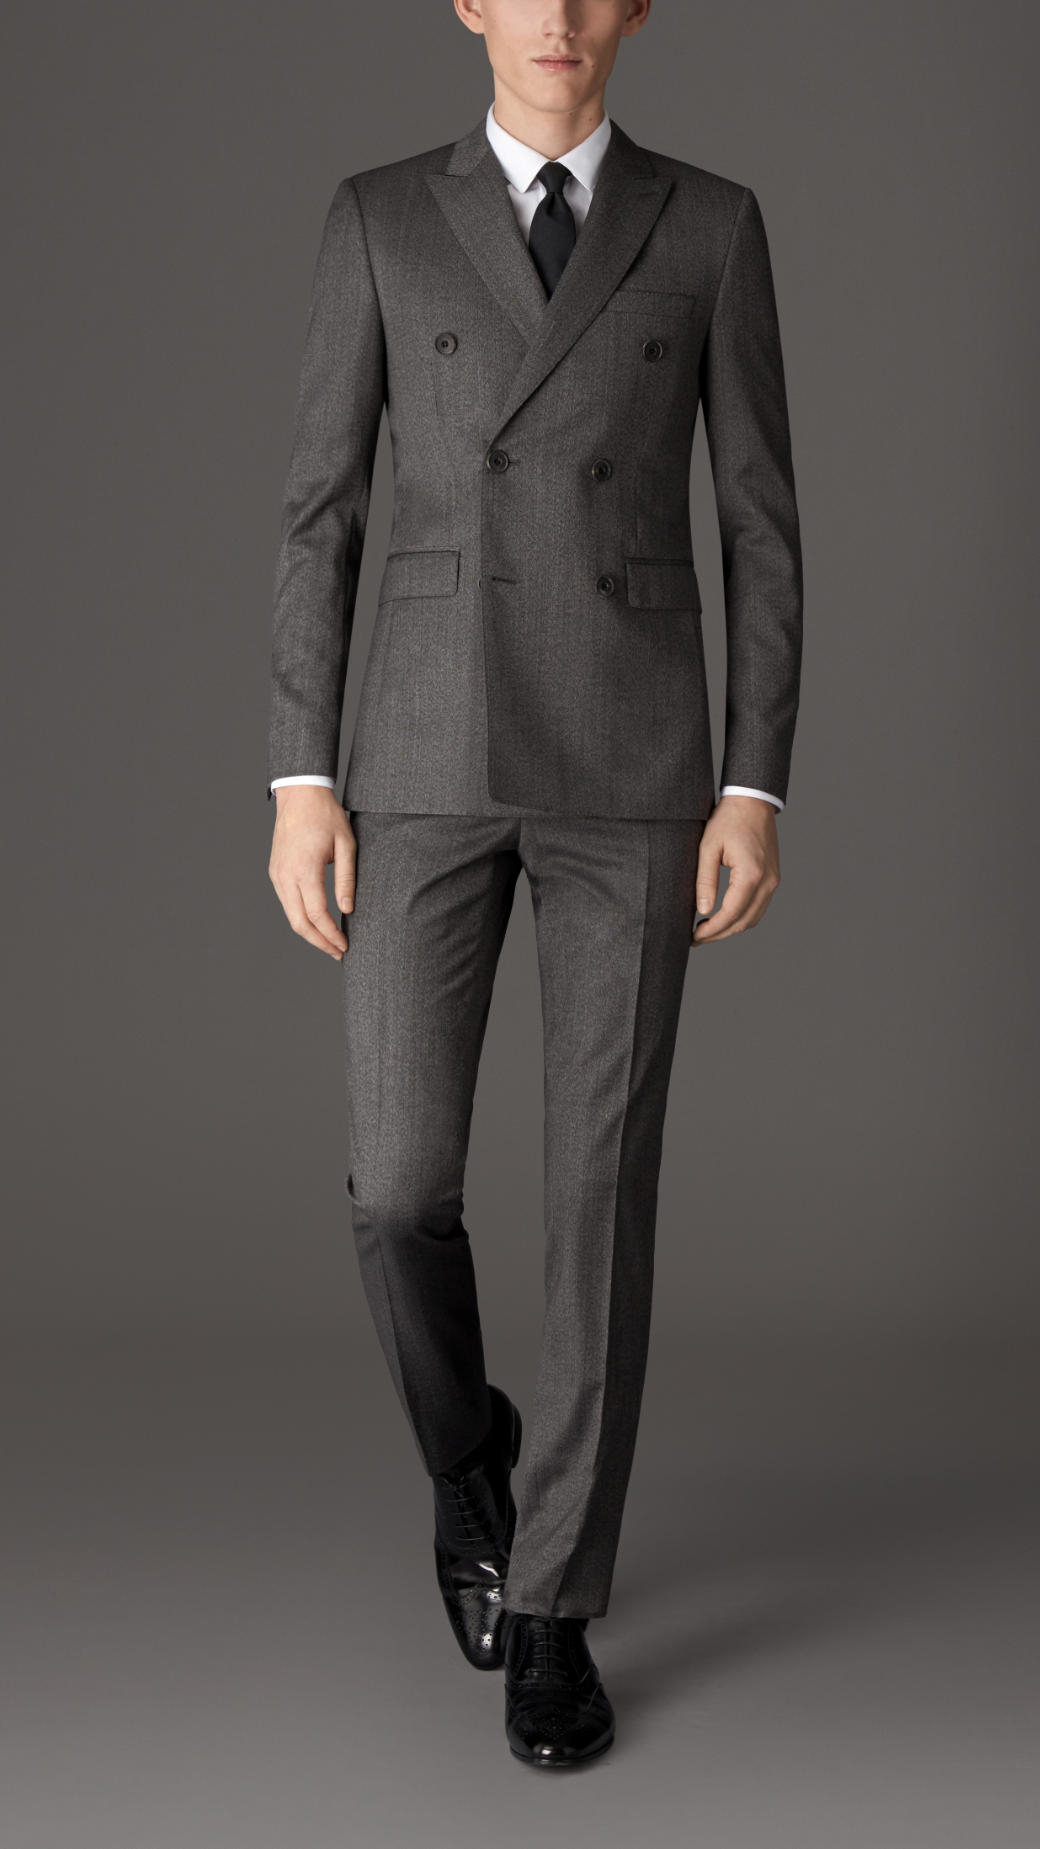 Burberry Slim Fit Virgin Wool Double-Breasted Suit in Gray for Men | Lyst